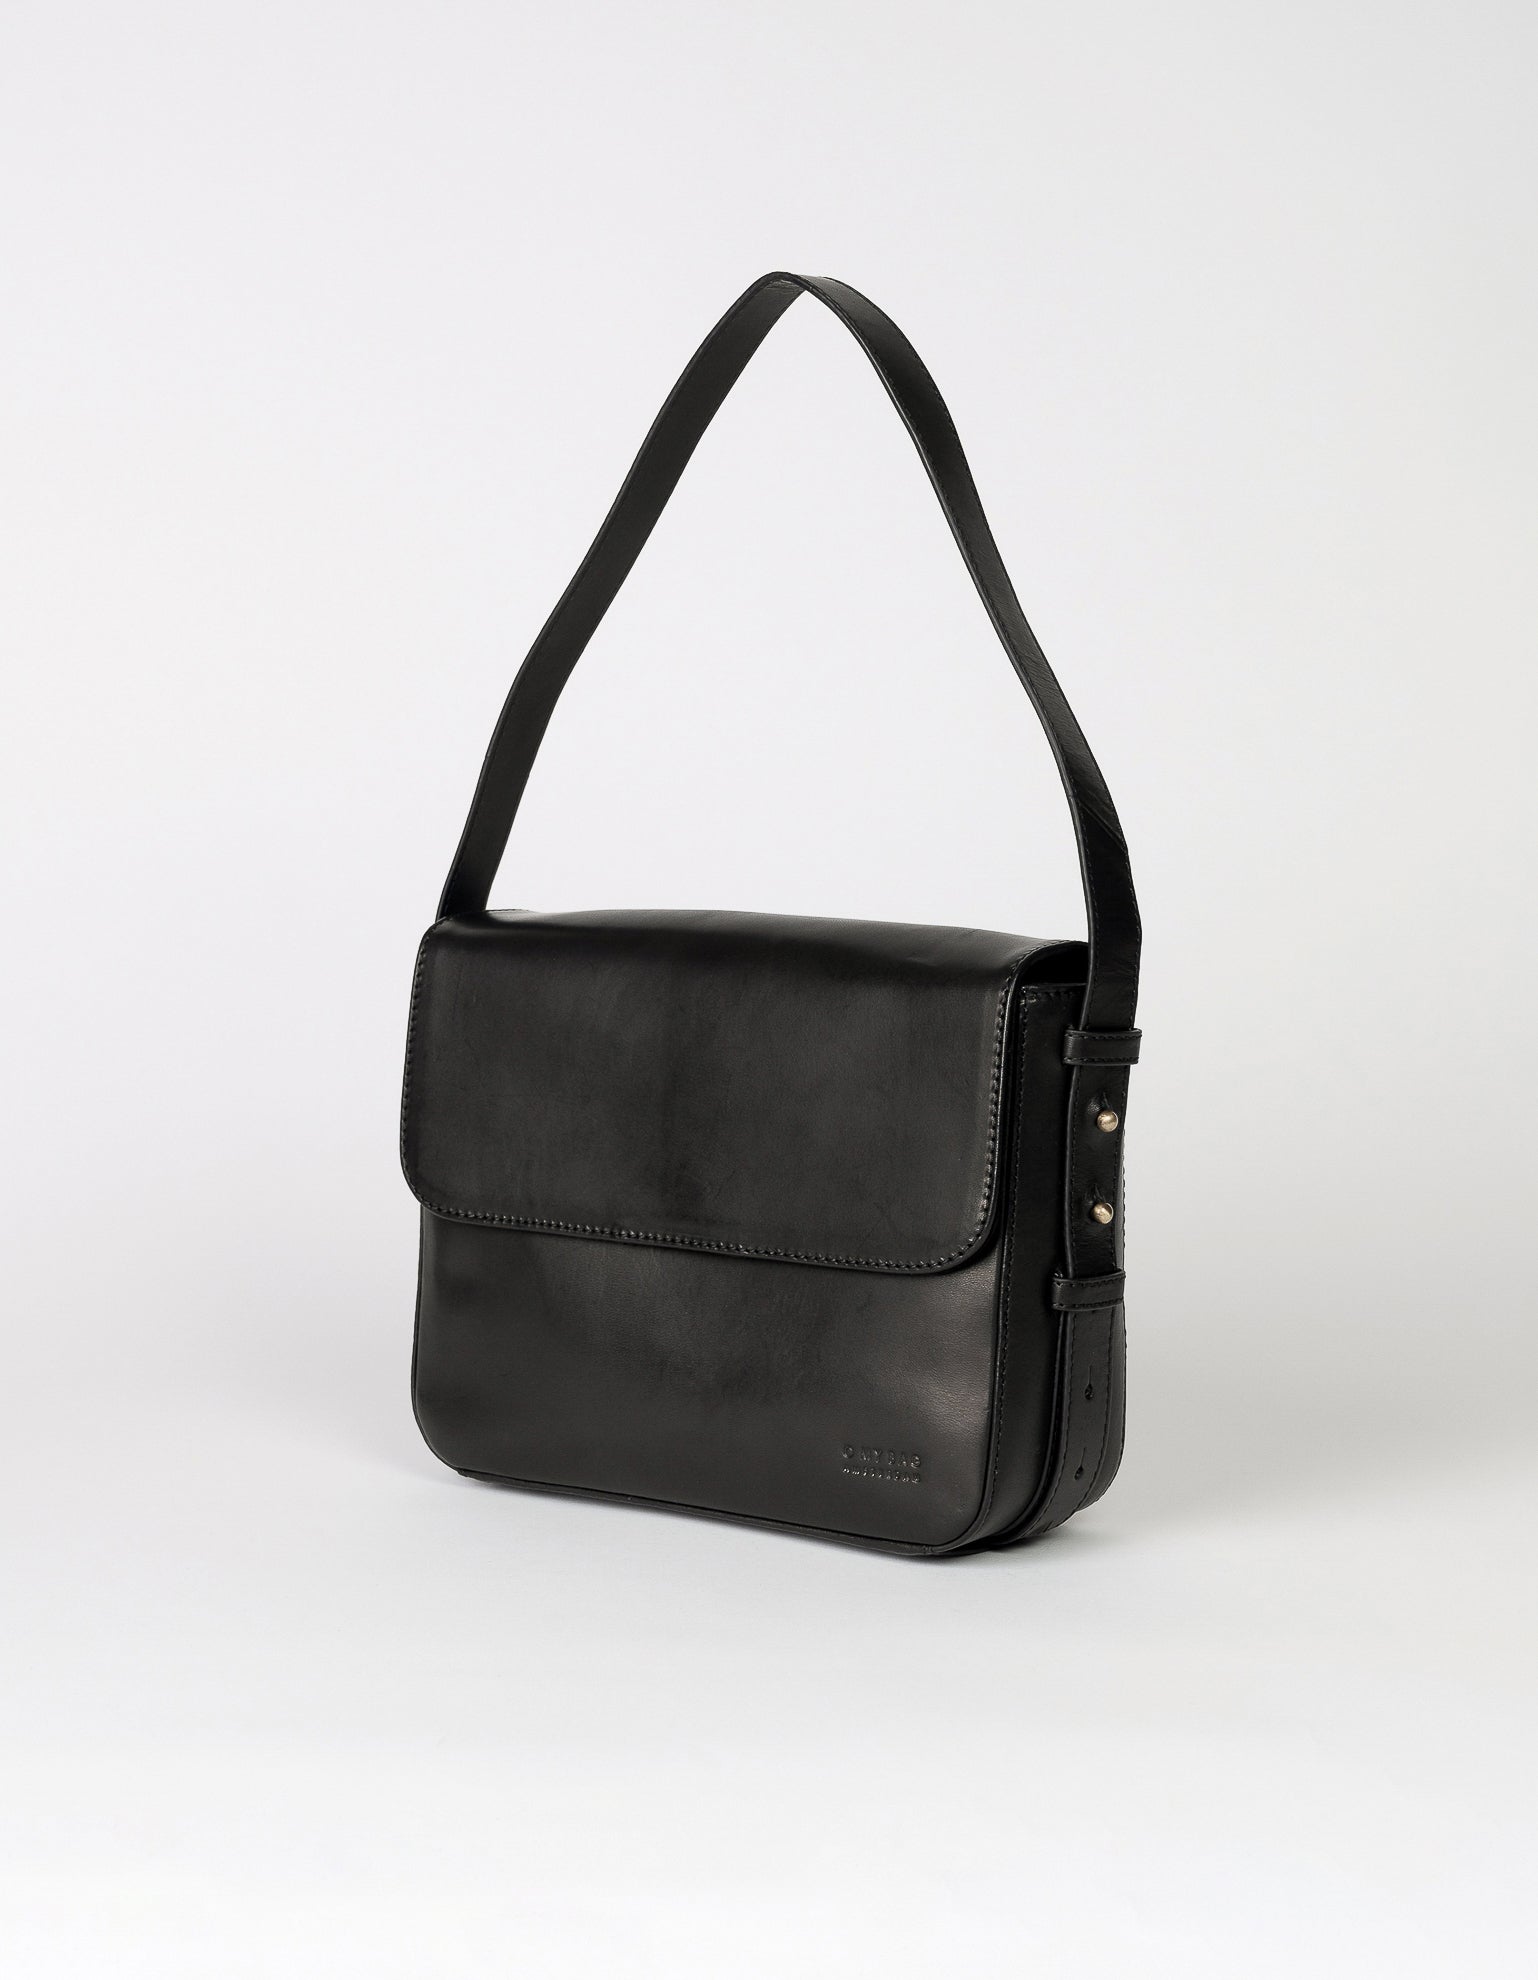 Black Leather womens handbag. Square shape with an adjustable strap. Side product image.